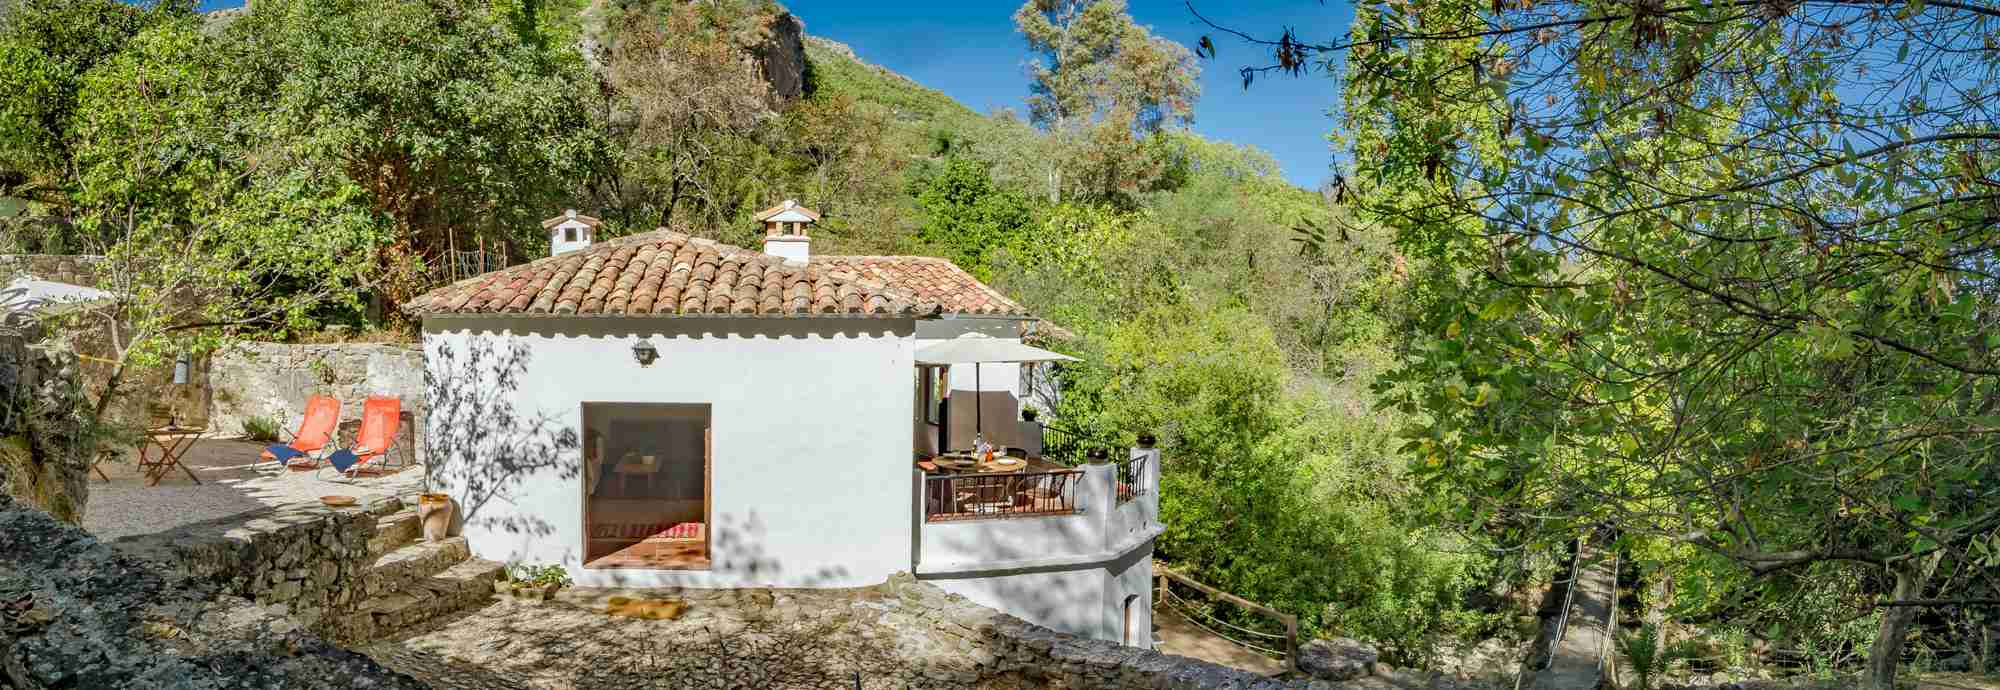 Self-catering rental accommodation in natural Grazalema setting